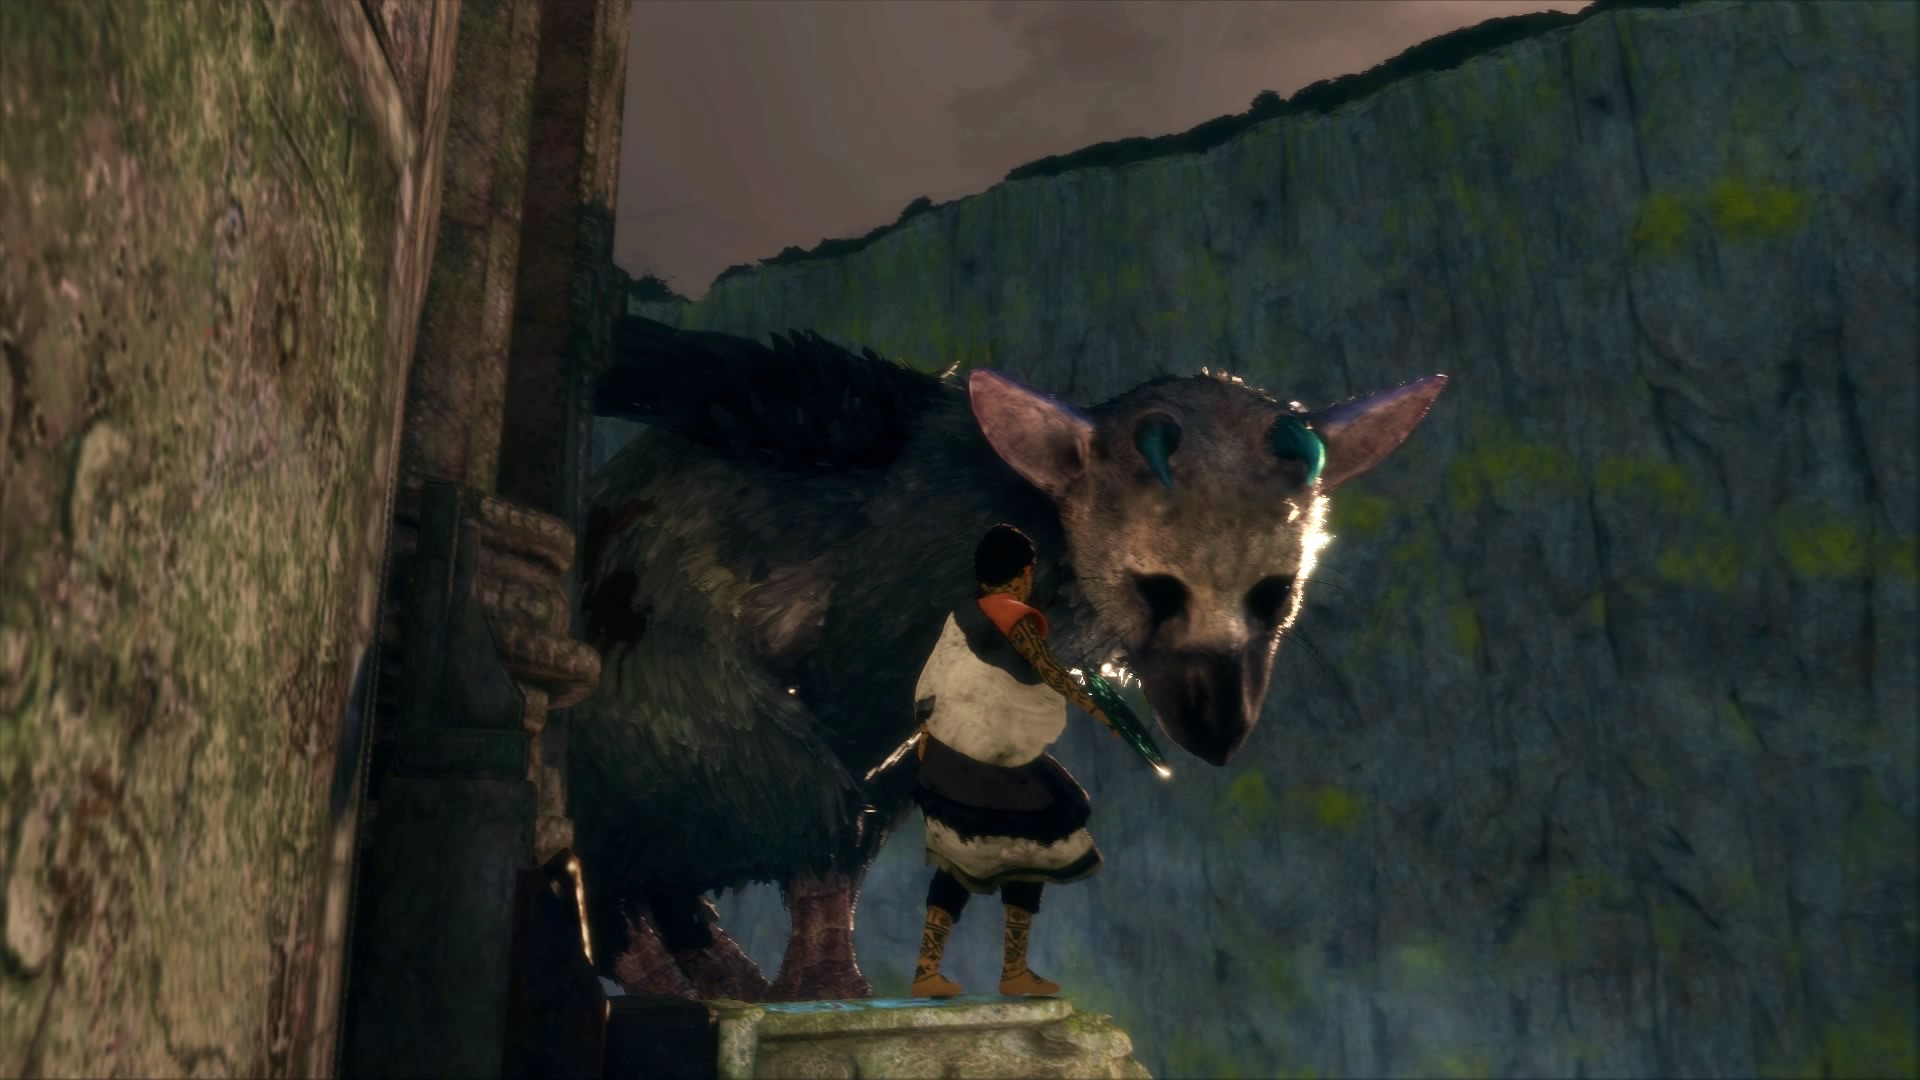 General 1920x1080 The Last Guardian video games screen shot Team Ico video game characters